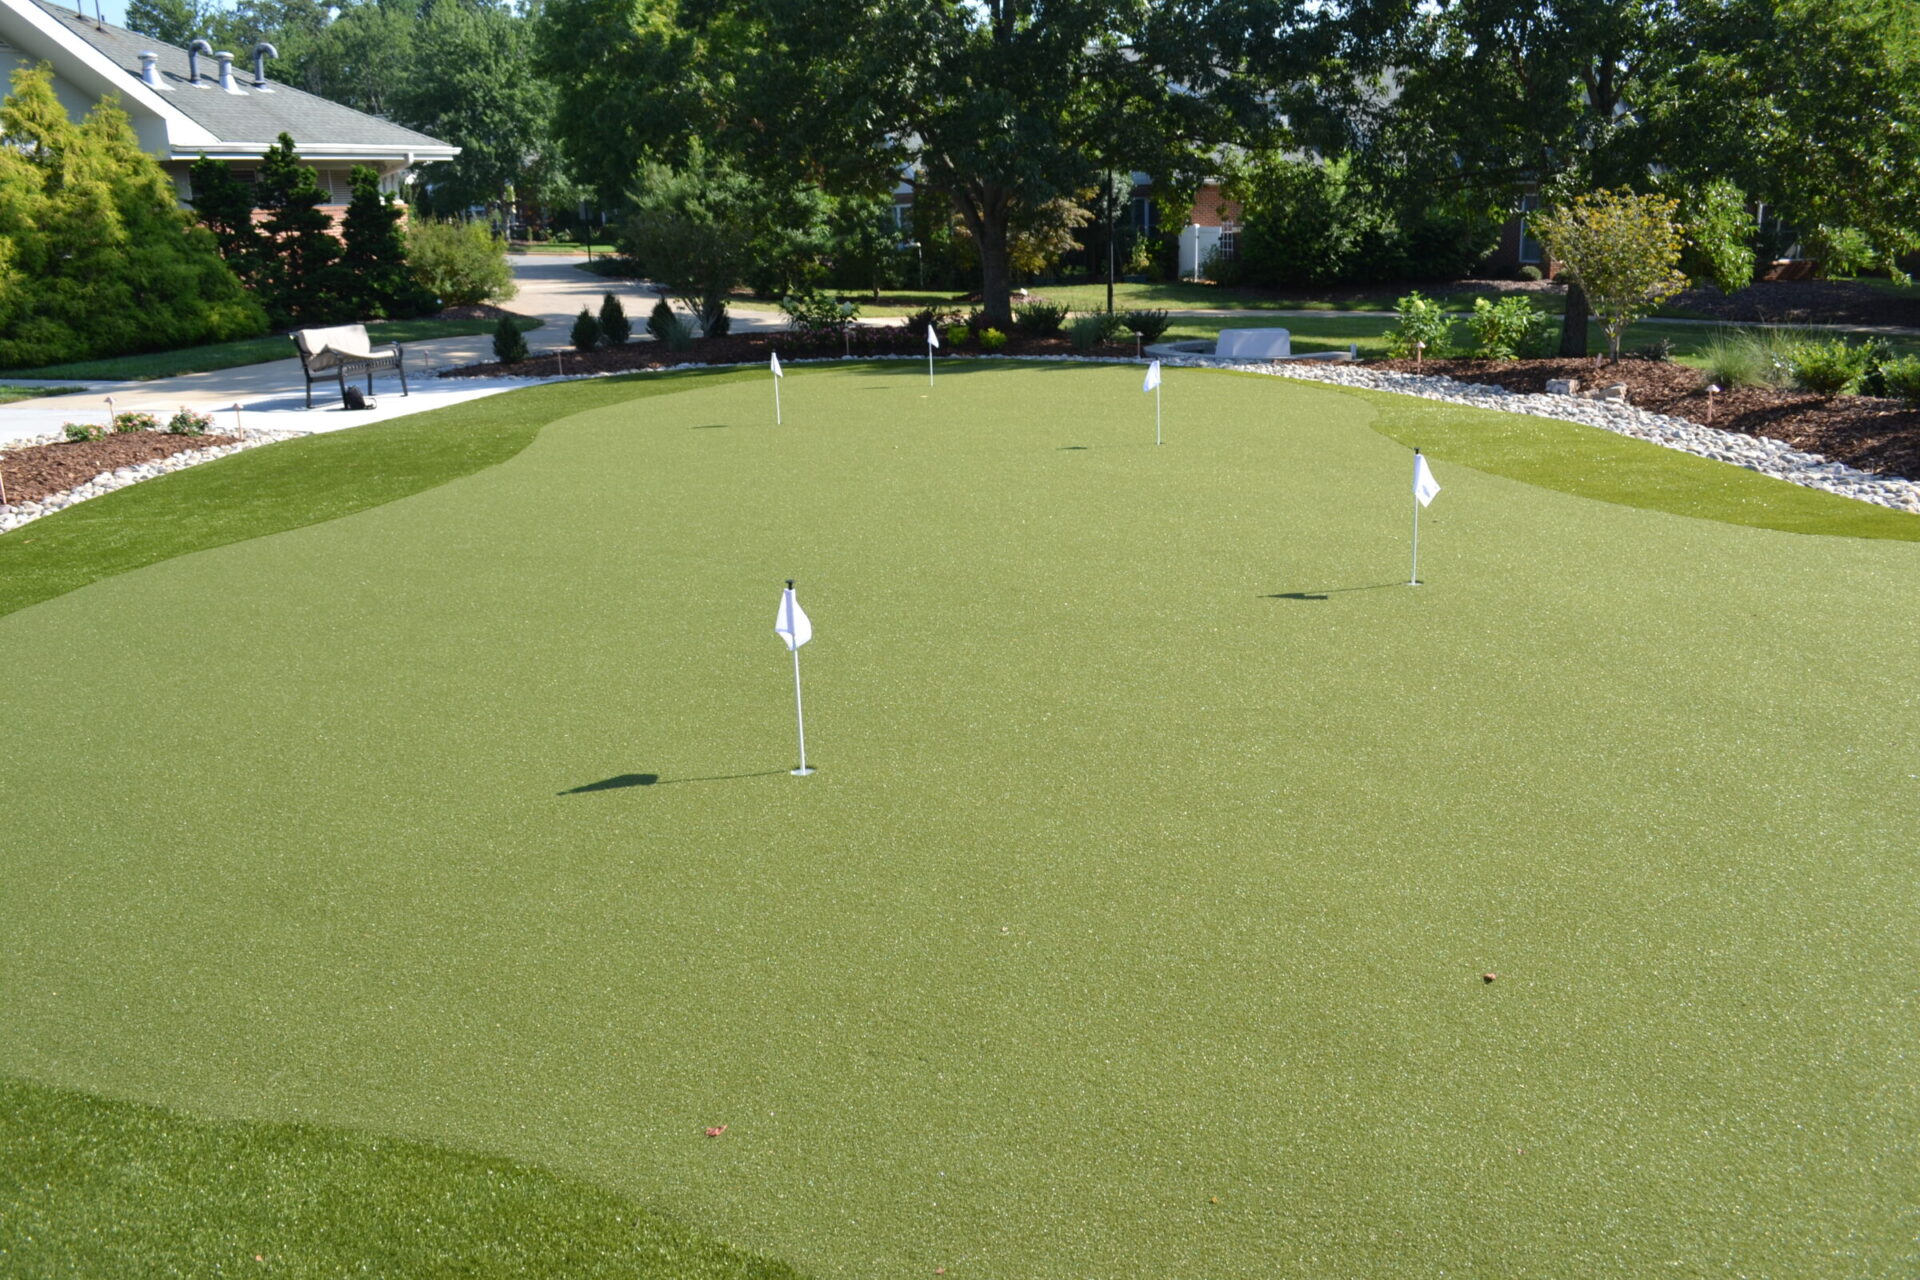 The image depicts an artificial turf putting green with multiple golf holes and white flags, surrounded by landscaped garden and benches.